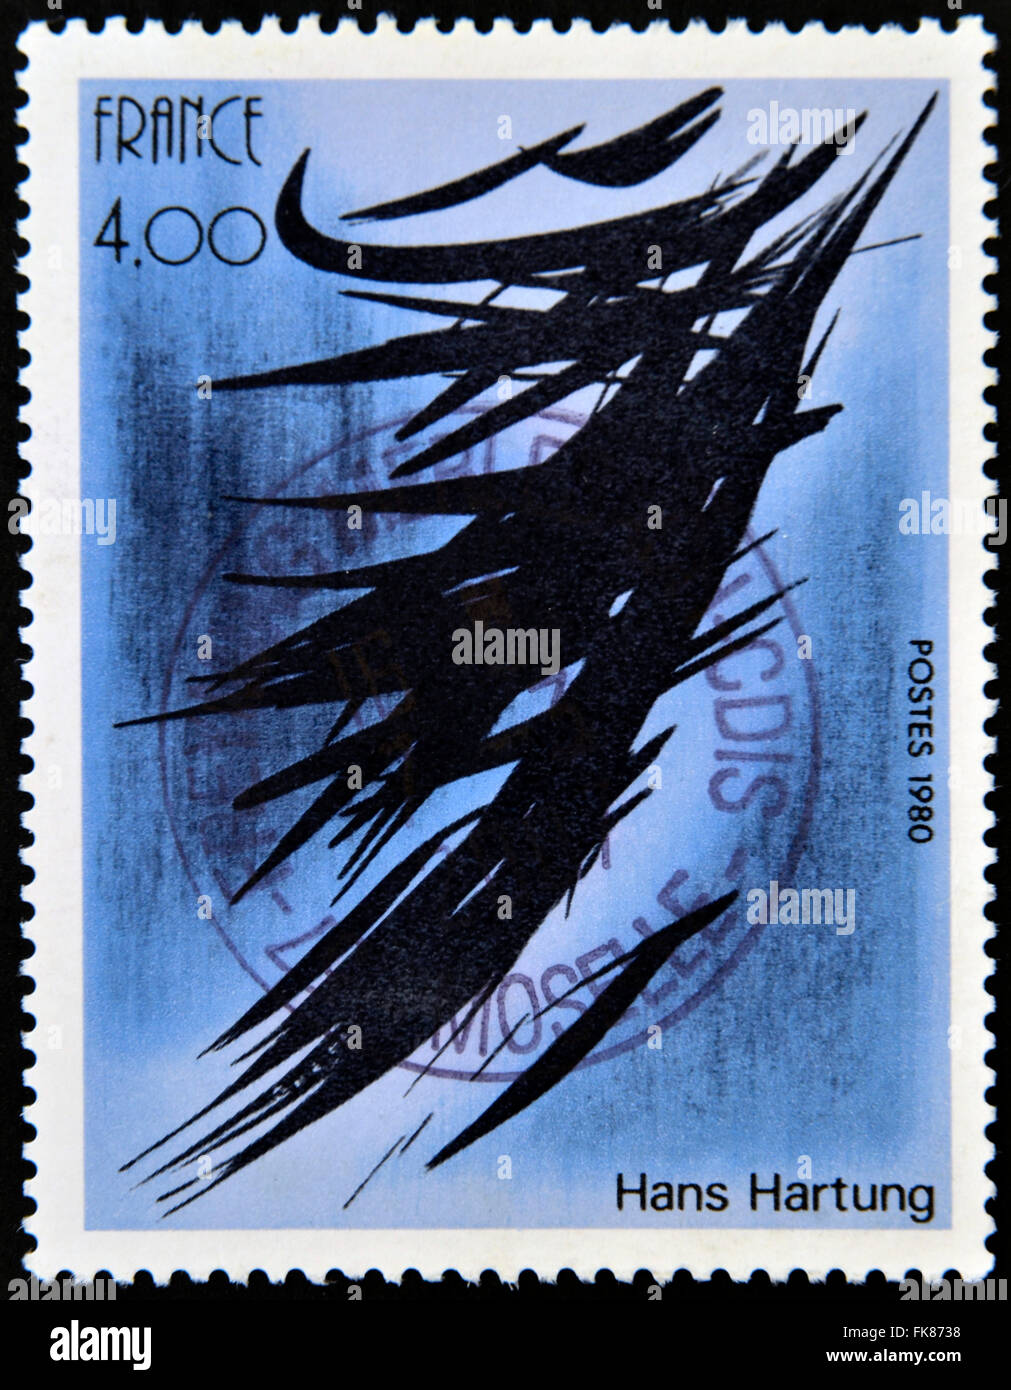 FRANCE - CIRCA 1980: a stamp printed in France shows Abstract, Painting by Hans Hartung, circa 1980 Stock Photo